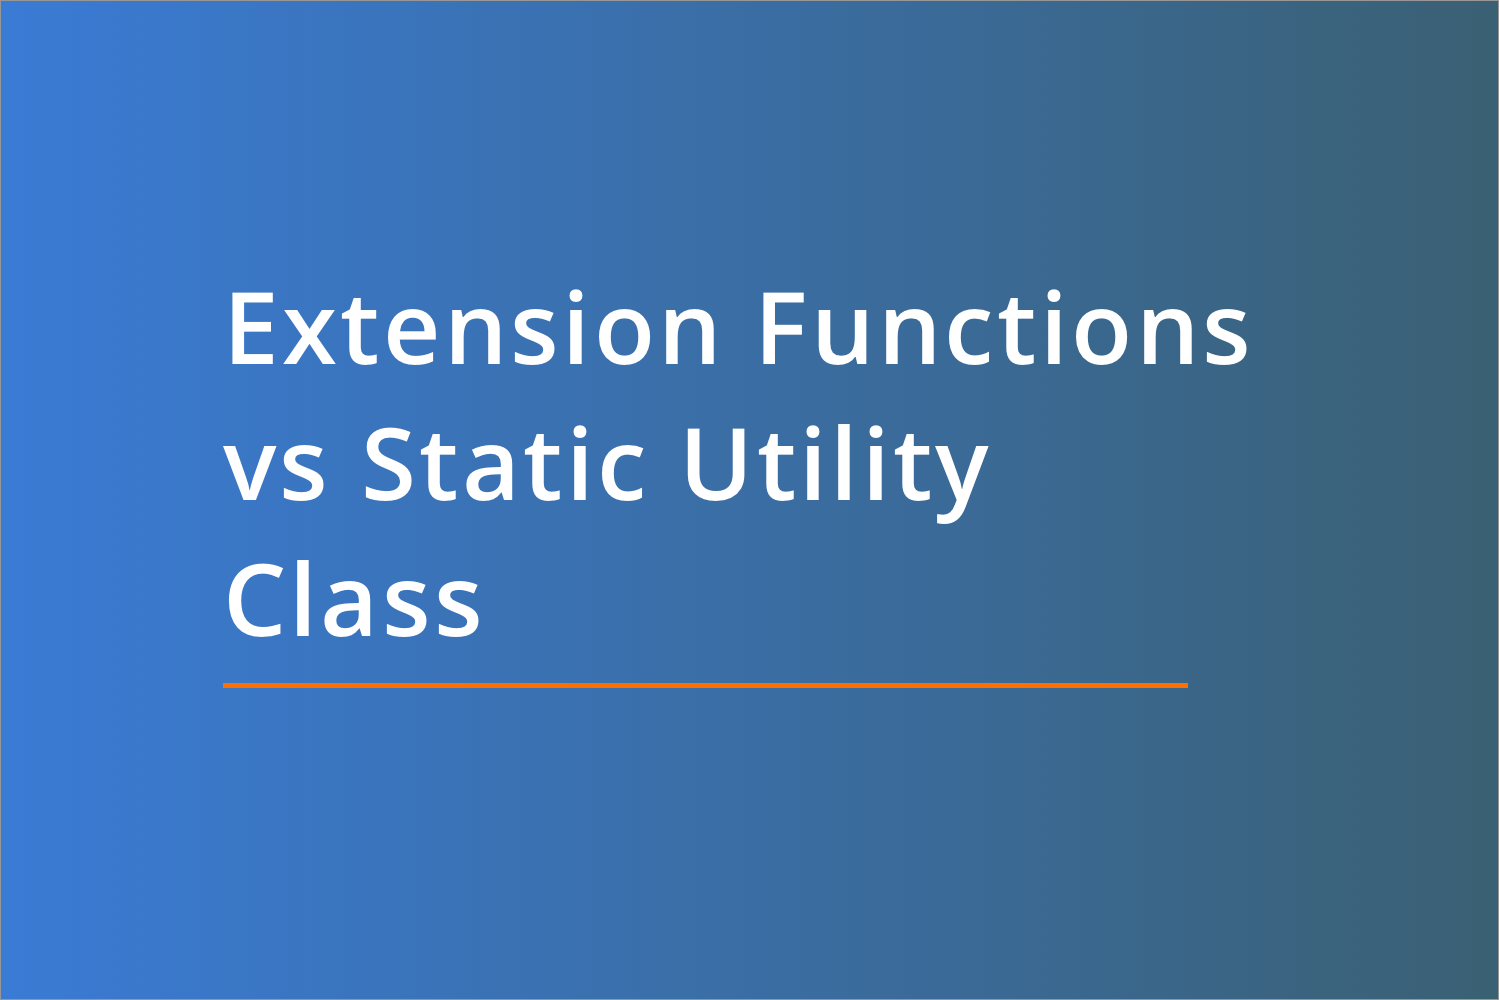 Extension Functions vs Static Utility Class